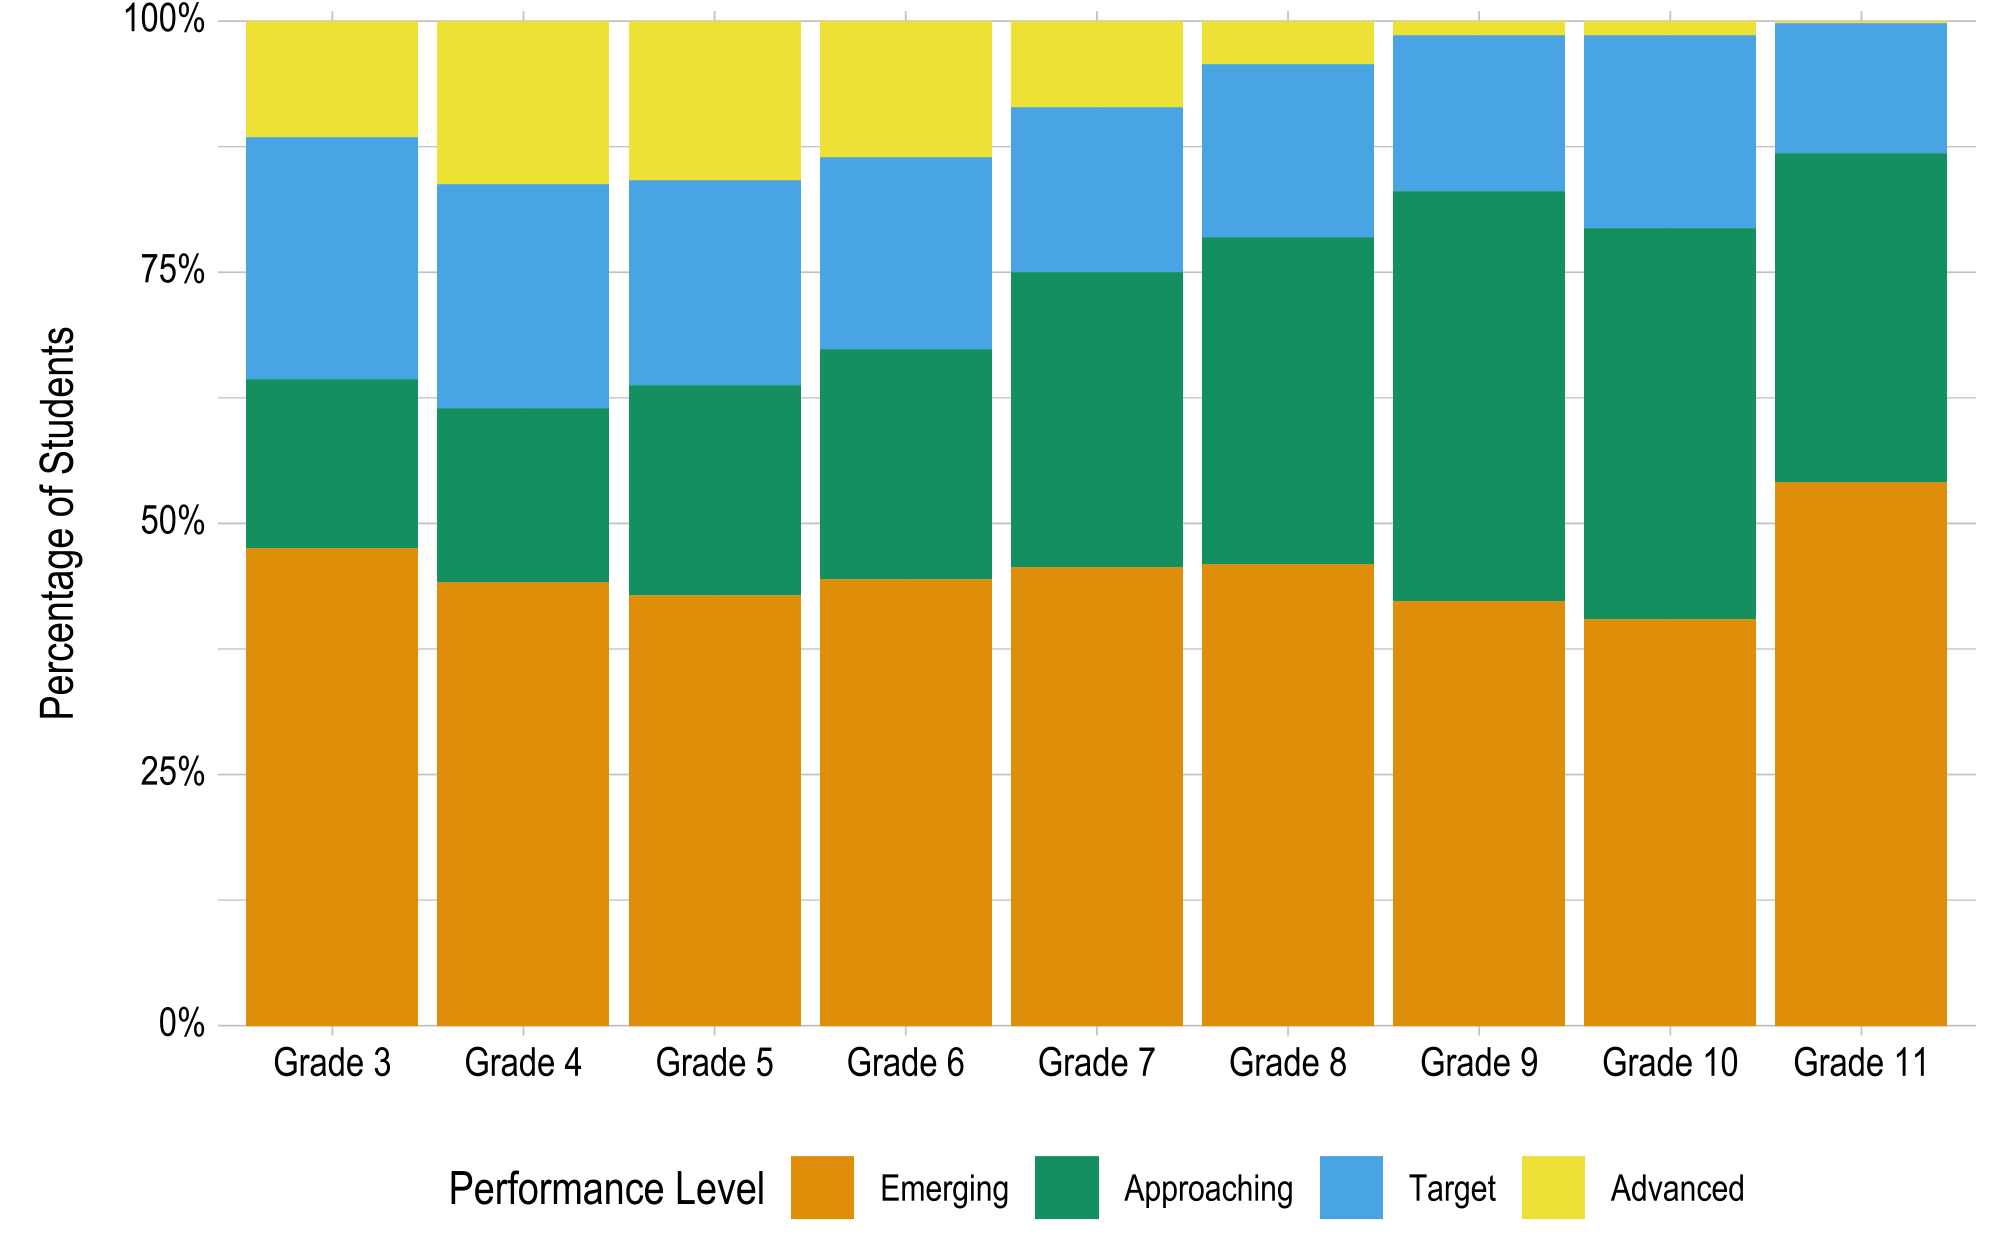 Bar graph, with one column per grade. The bars are all the same height, going to 100%. Each bar is split into four sections showing the percentage of student within each grade that achieved at each performance level in mathematics.